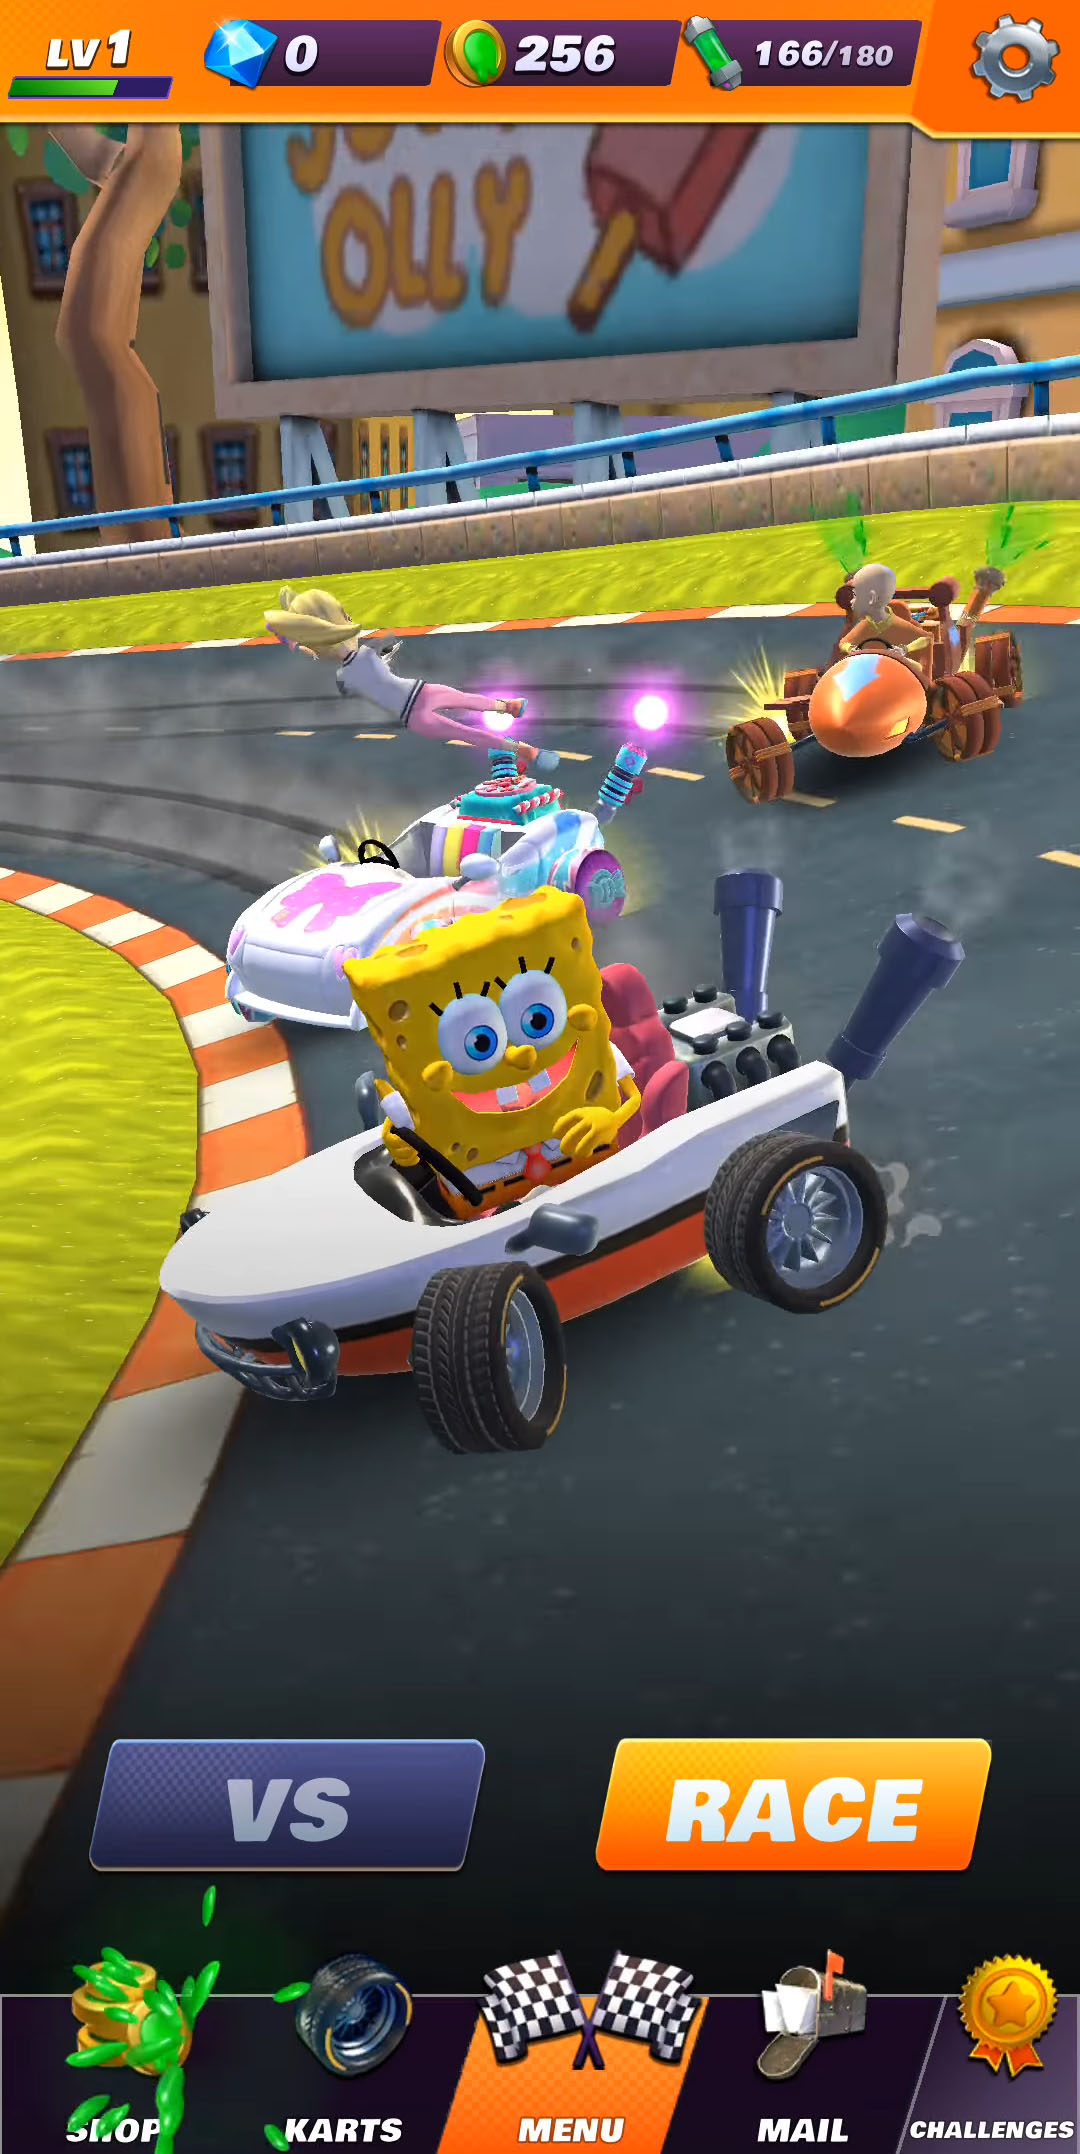 Stream Mario Kart Tour: How to download and install the APK on your Android  device from Brandi